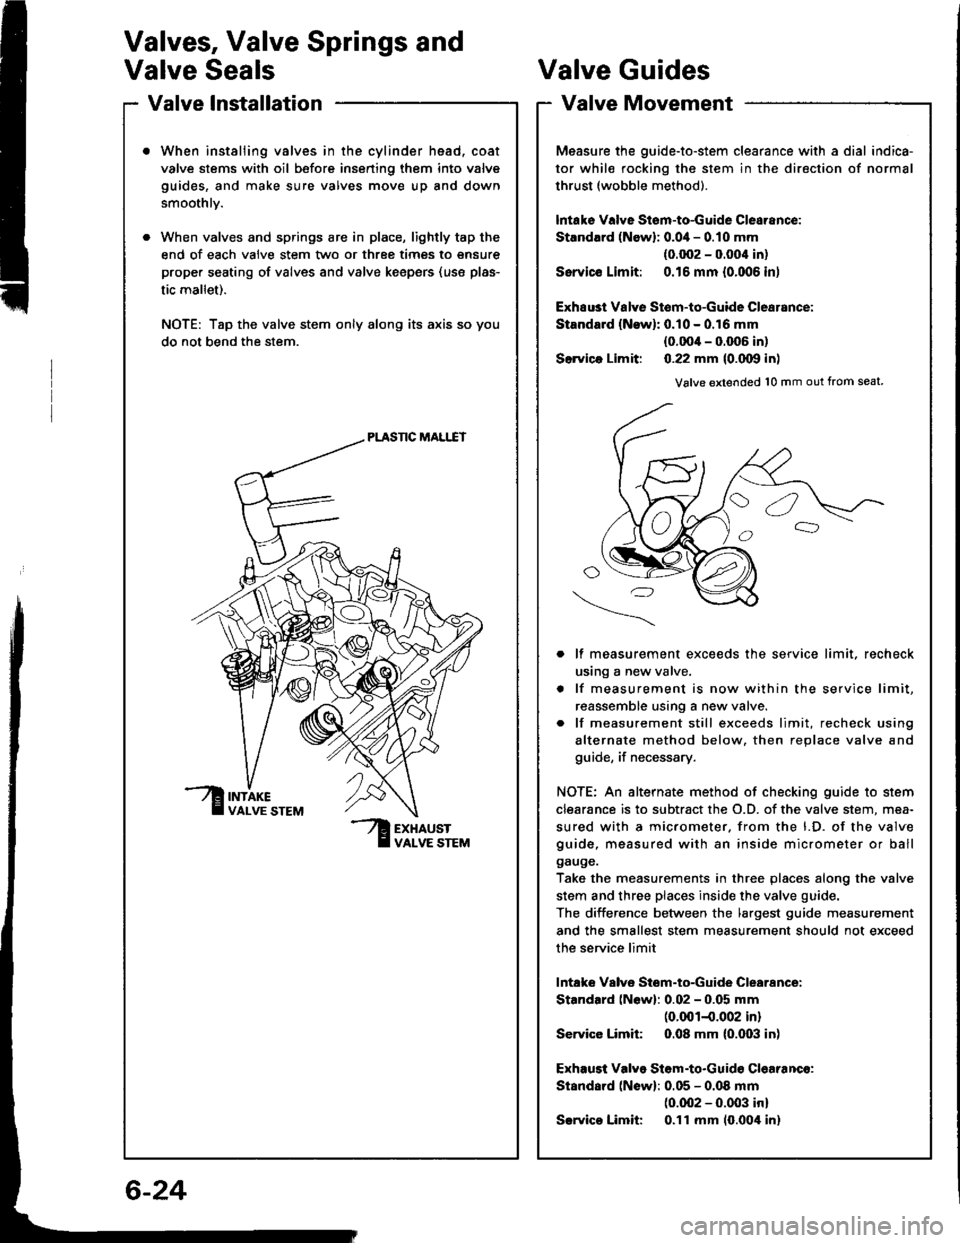 HONDA INTEGRA 1994 4.G Workshop Manual Valves, Valve Springs and
Valve Seals
Valve lnstallation
When instaliing valves in the cylinder head, coat
valve stems with oil before insening them into valve
guides, and make sure valves move up and